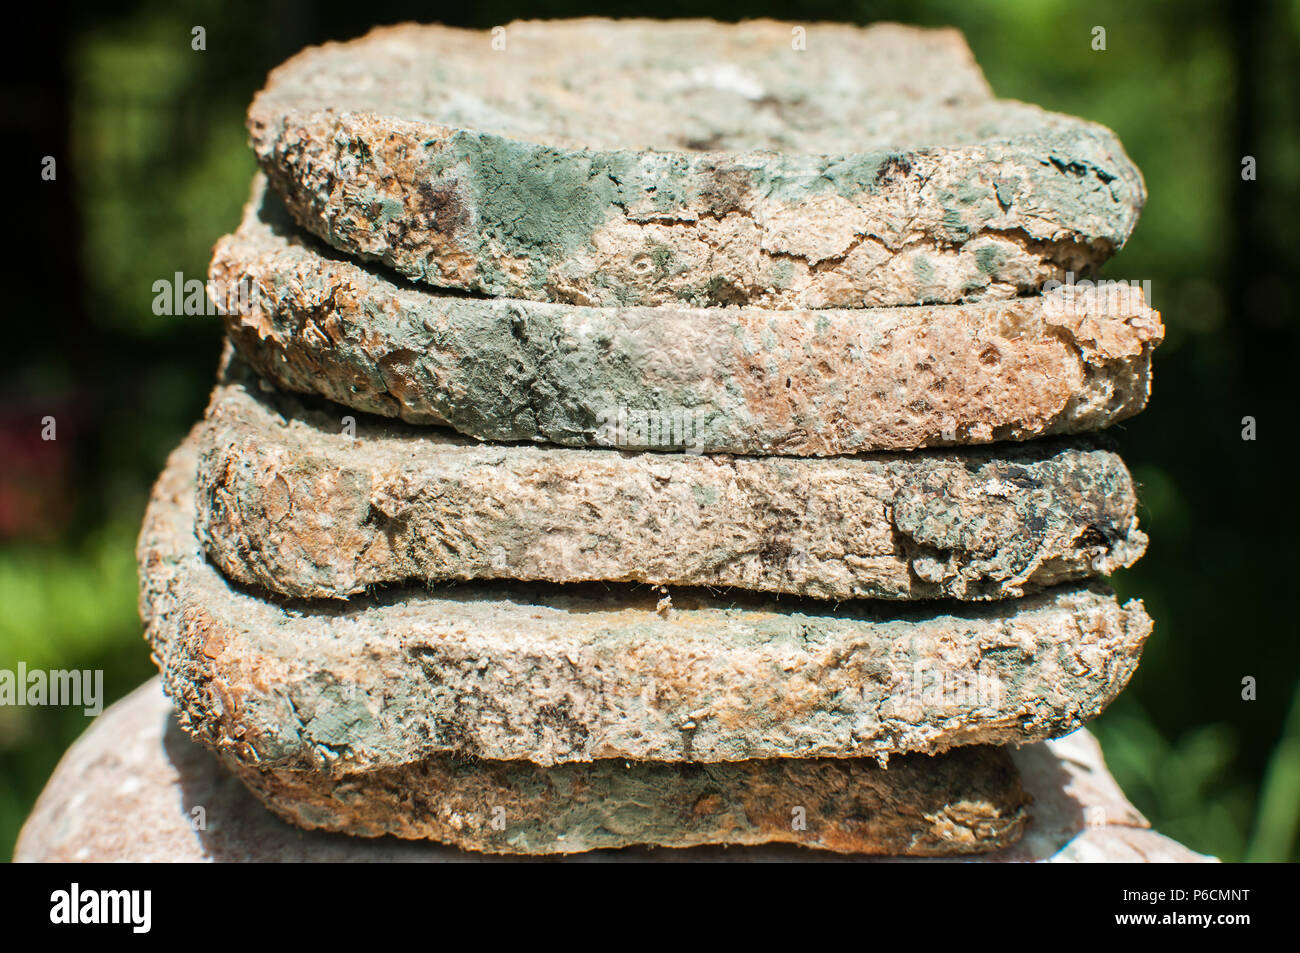 Pile of moldy slices of whole-grain bread on moldy loaf closeup on green natural background Stock Photo